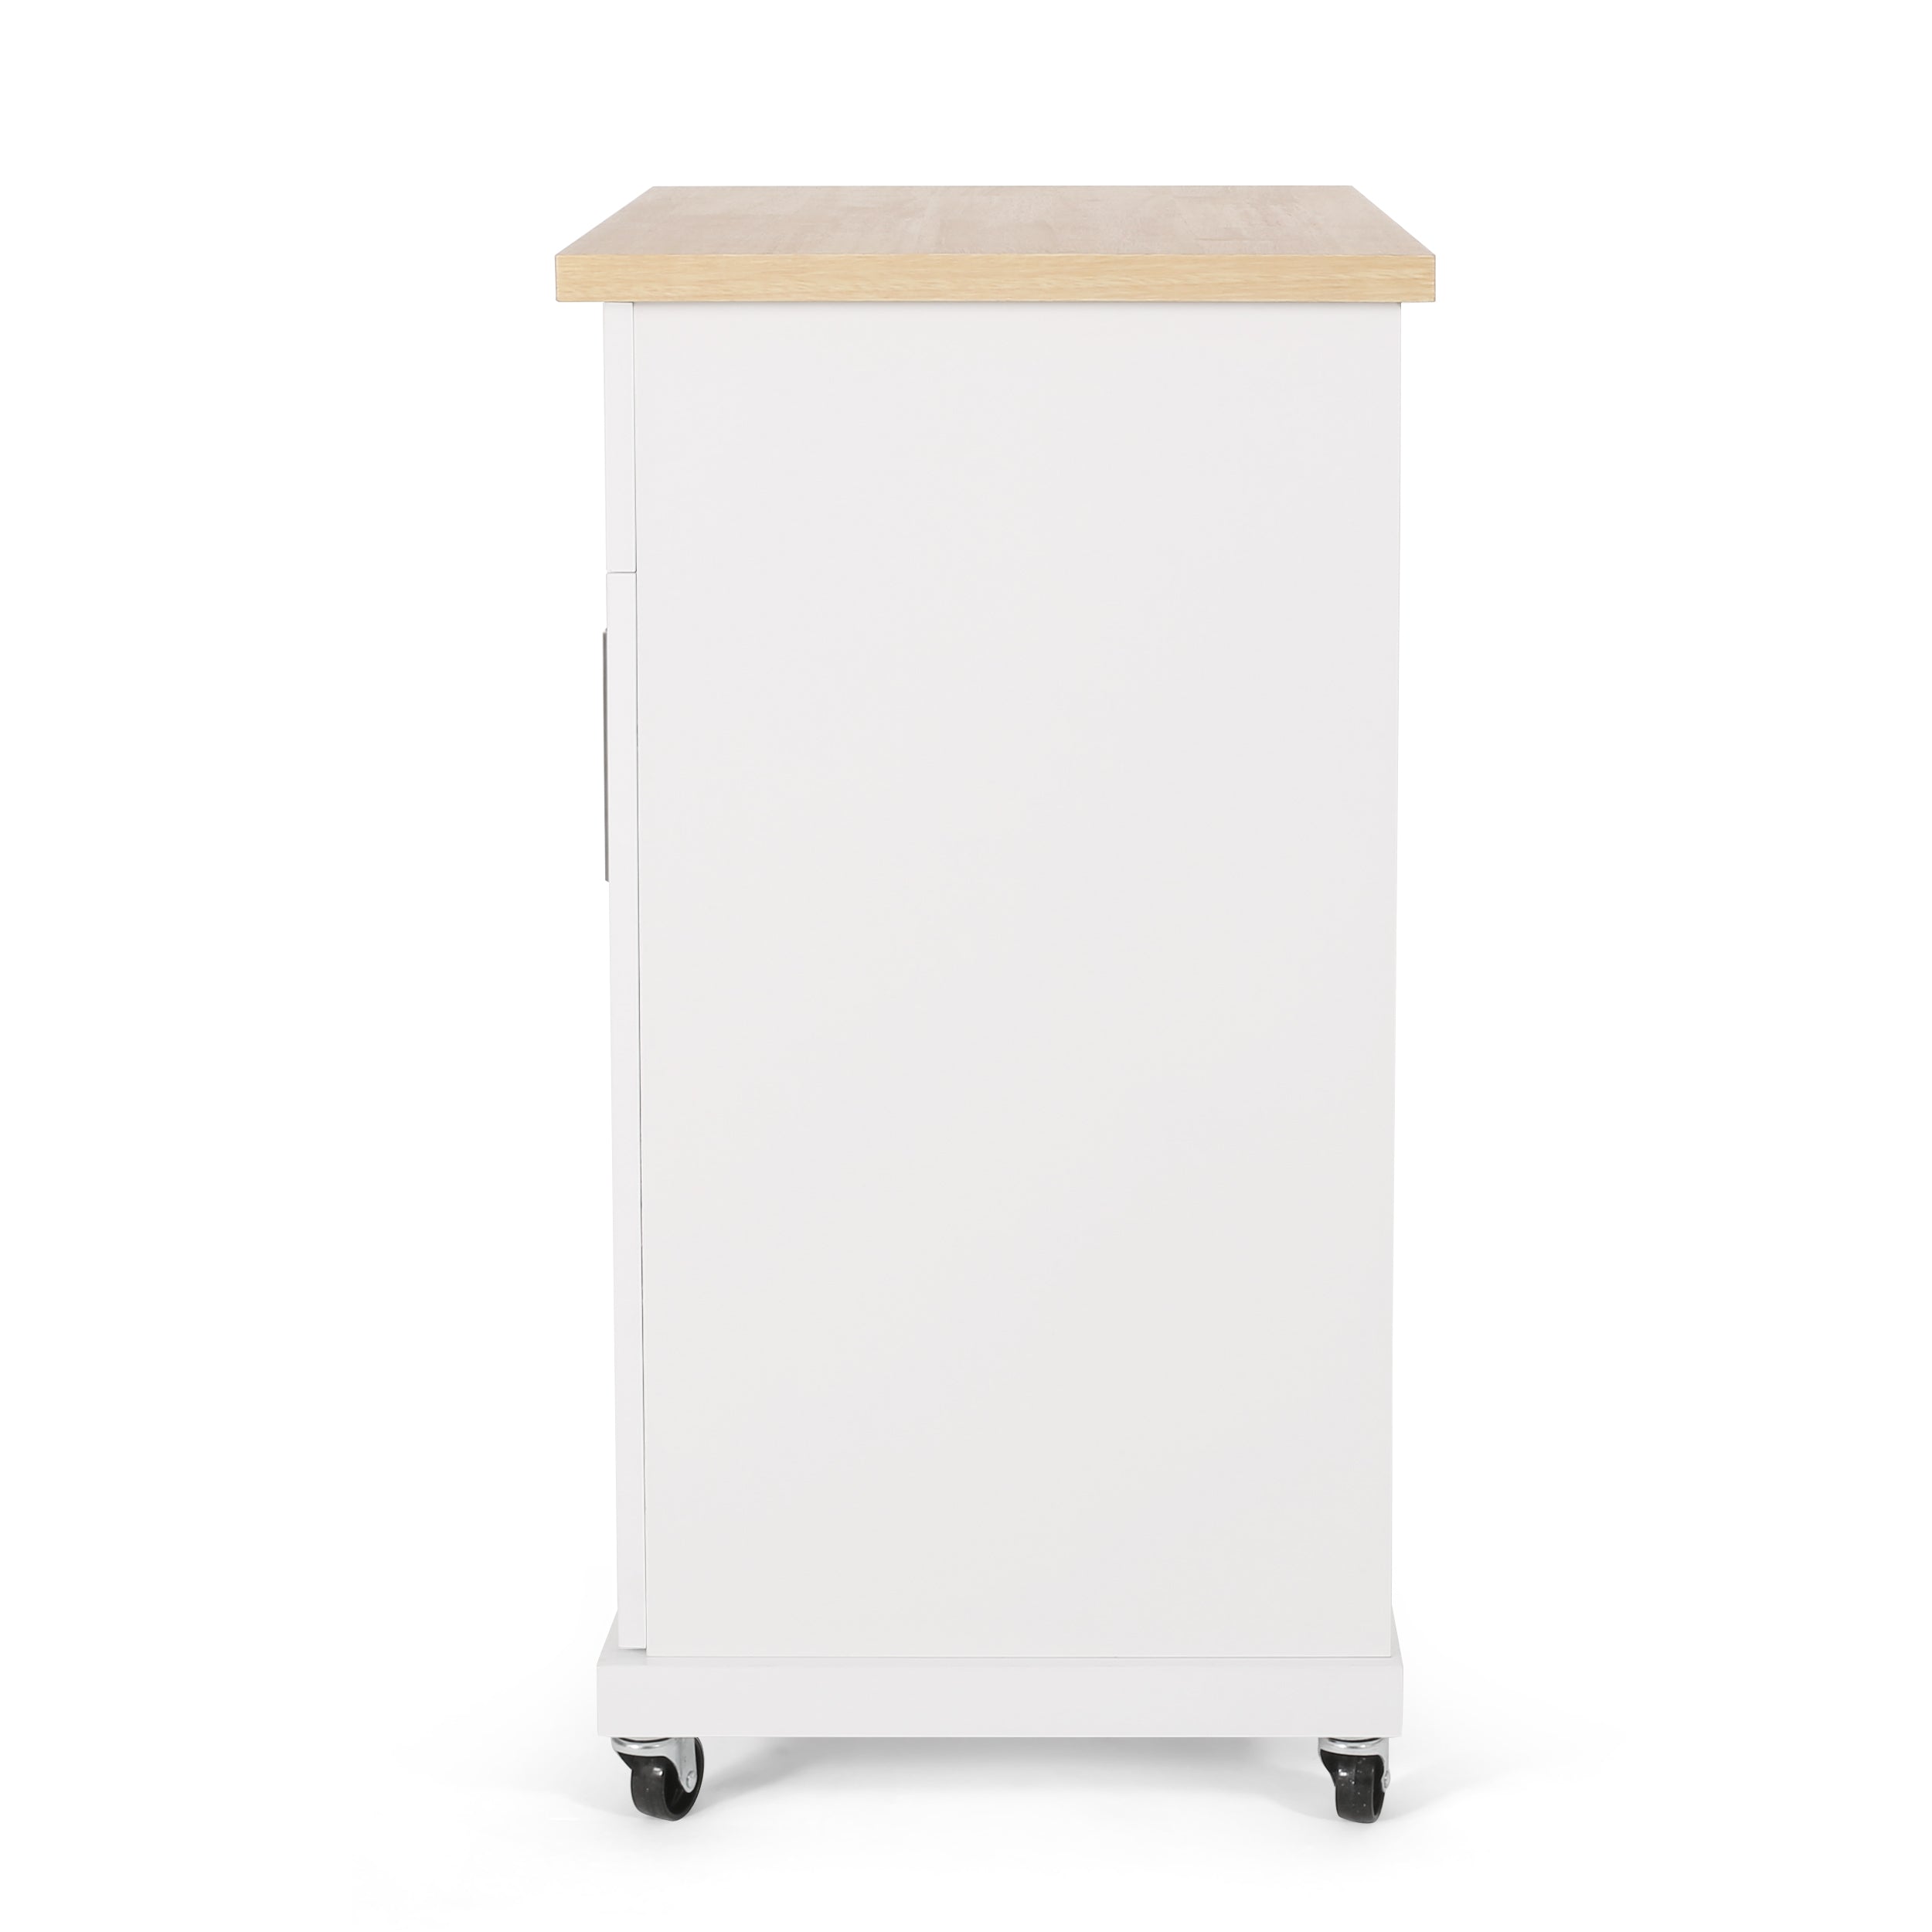 GDF Studio Negley Contemporary Kitchen Cart with Wheels， Natural and White